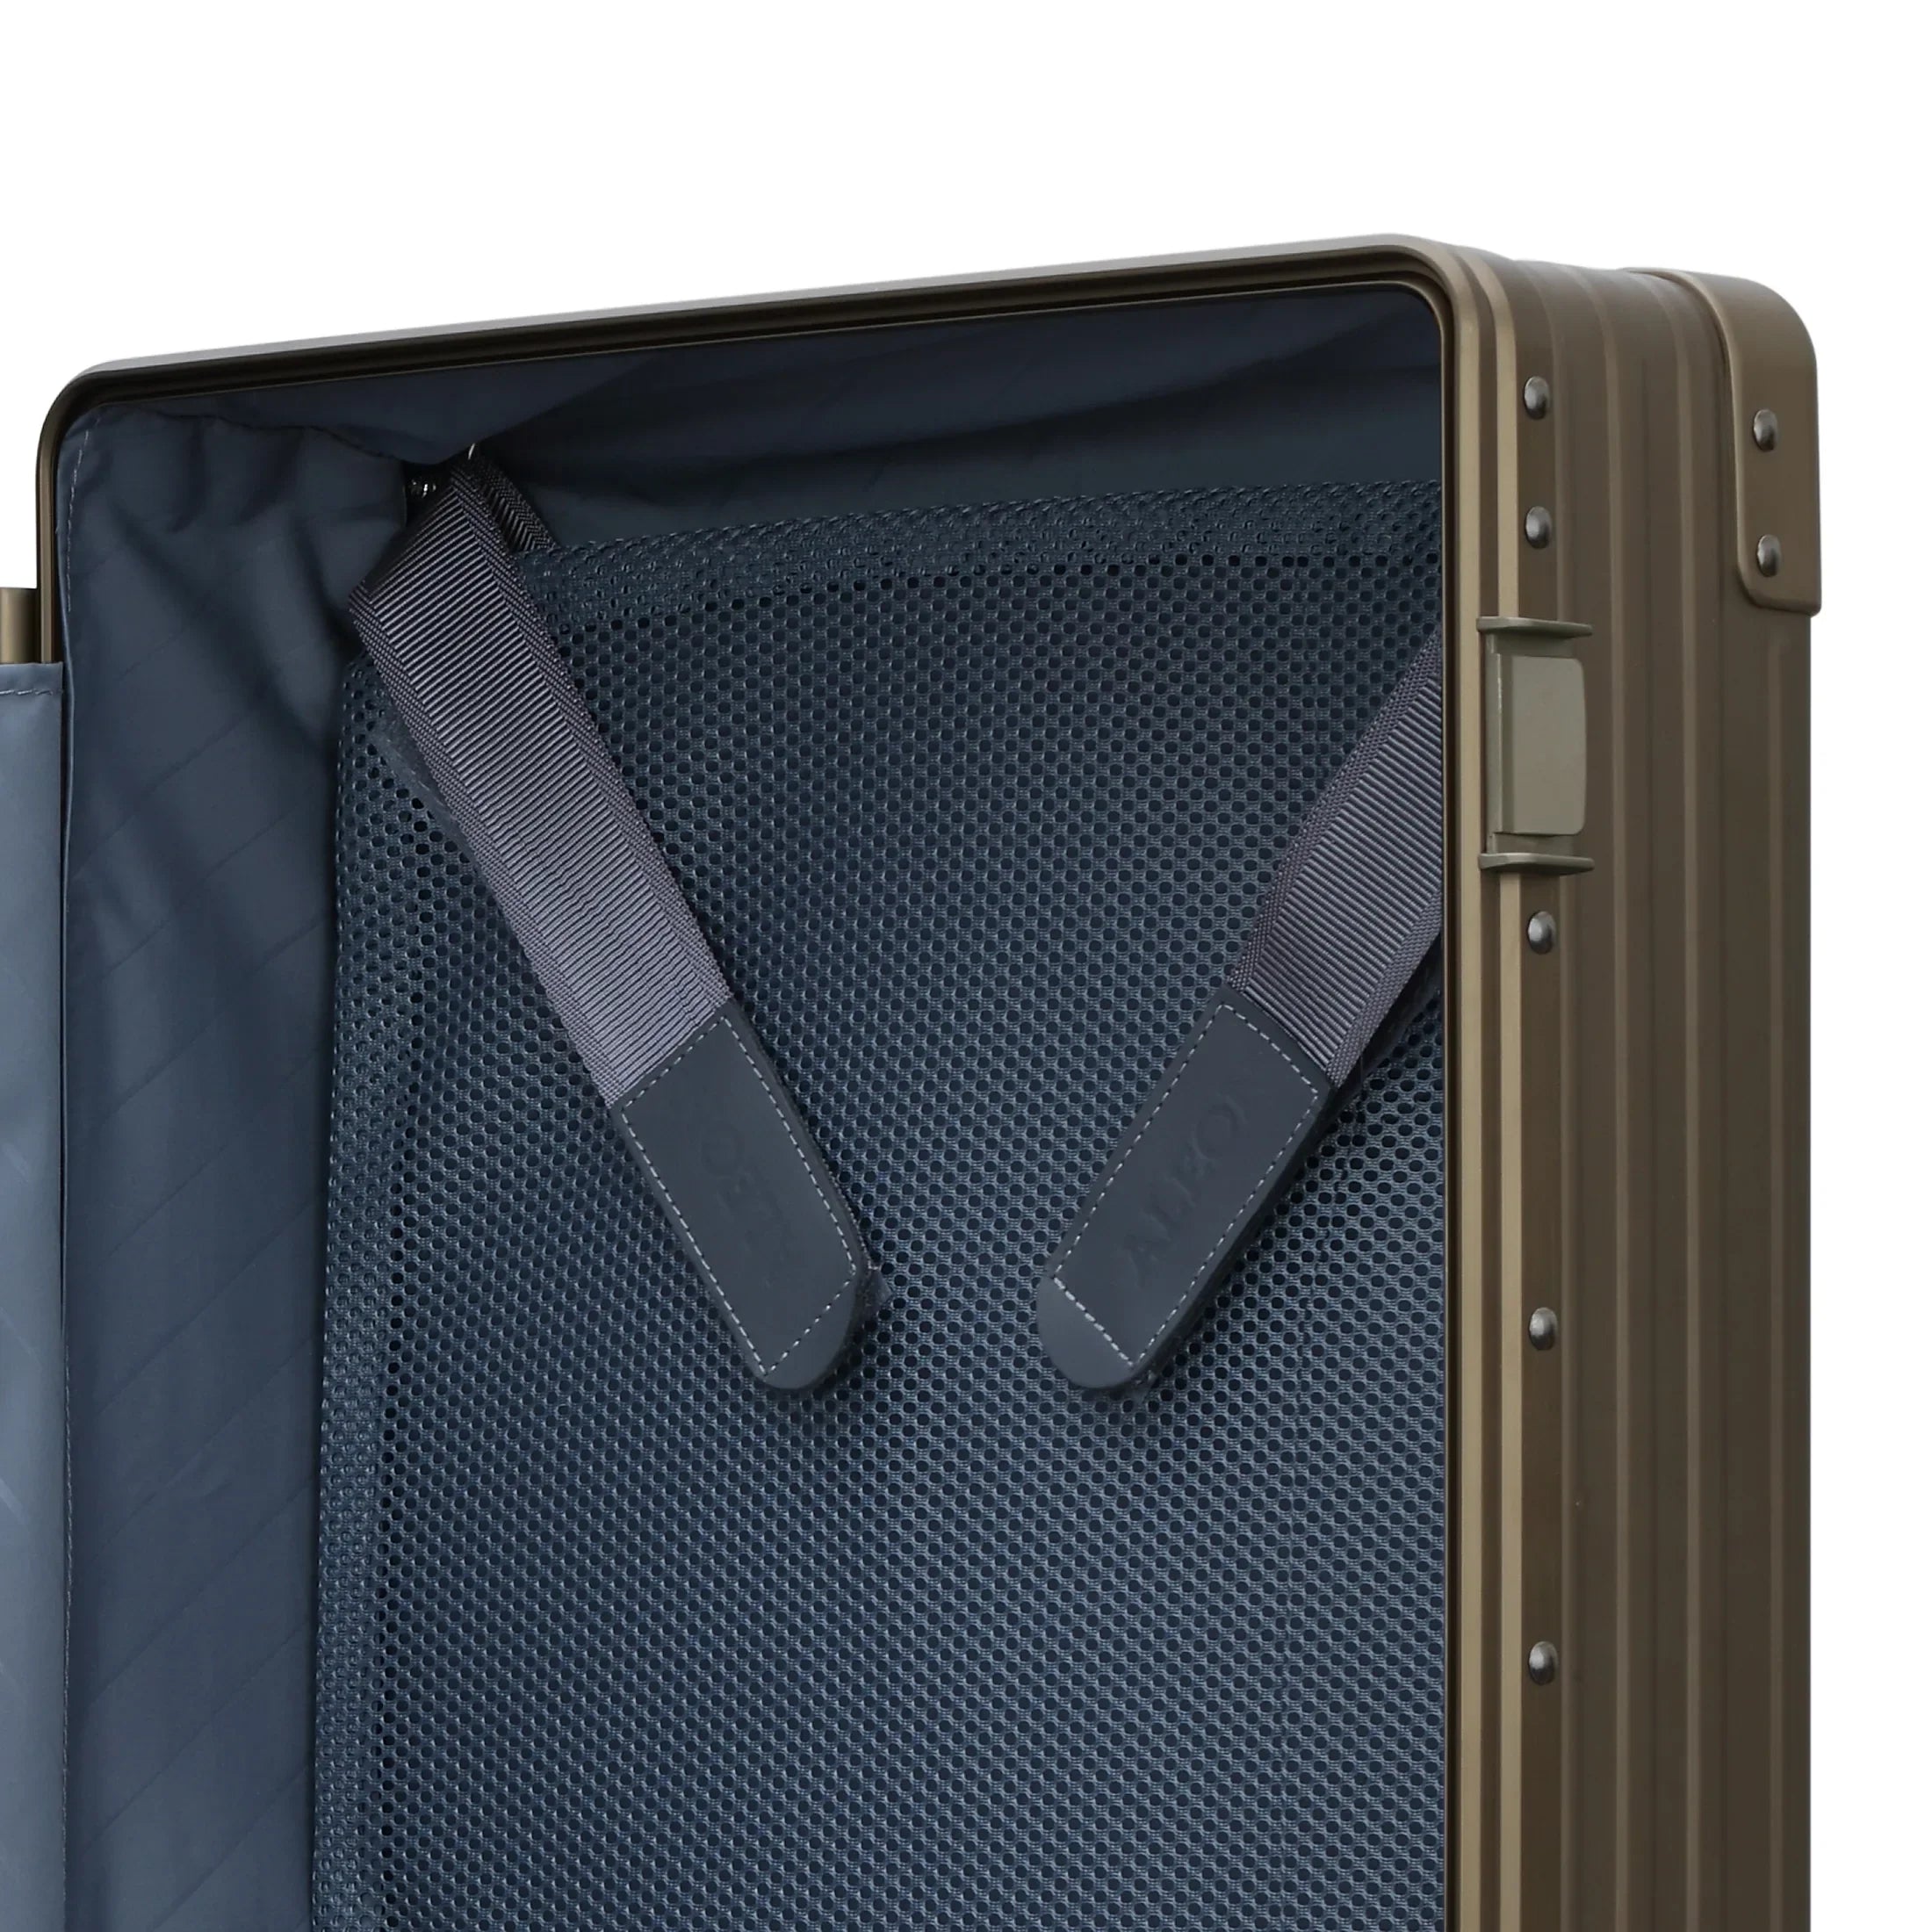 Valise cabine 4 roues Aleon Domestic Carry-On 53 cm - Saphir